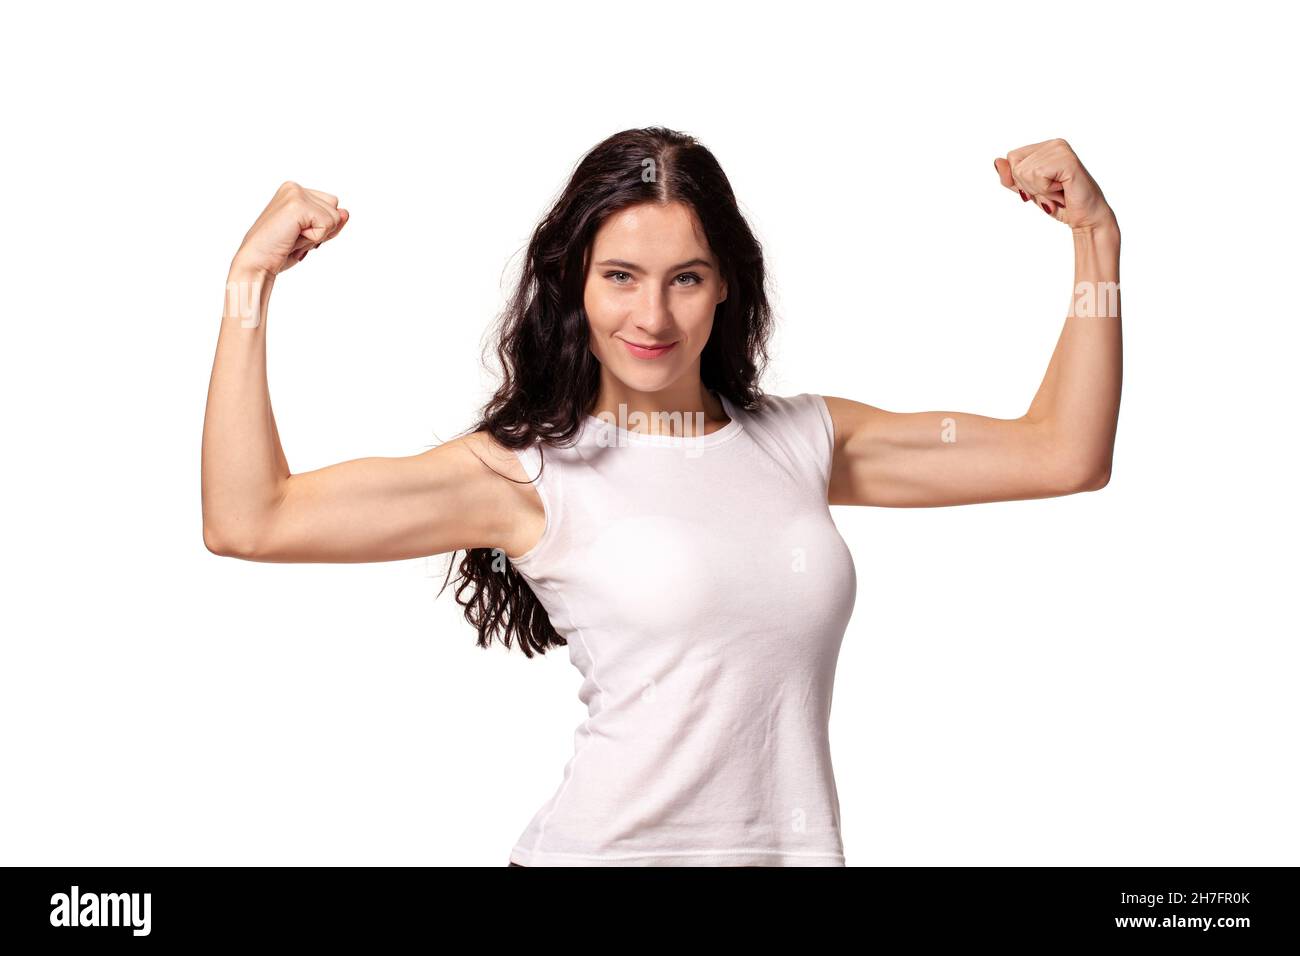 Happy young woman shows her muscles isolated on white background Stock Photo